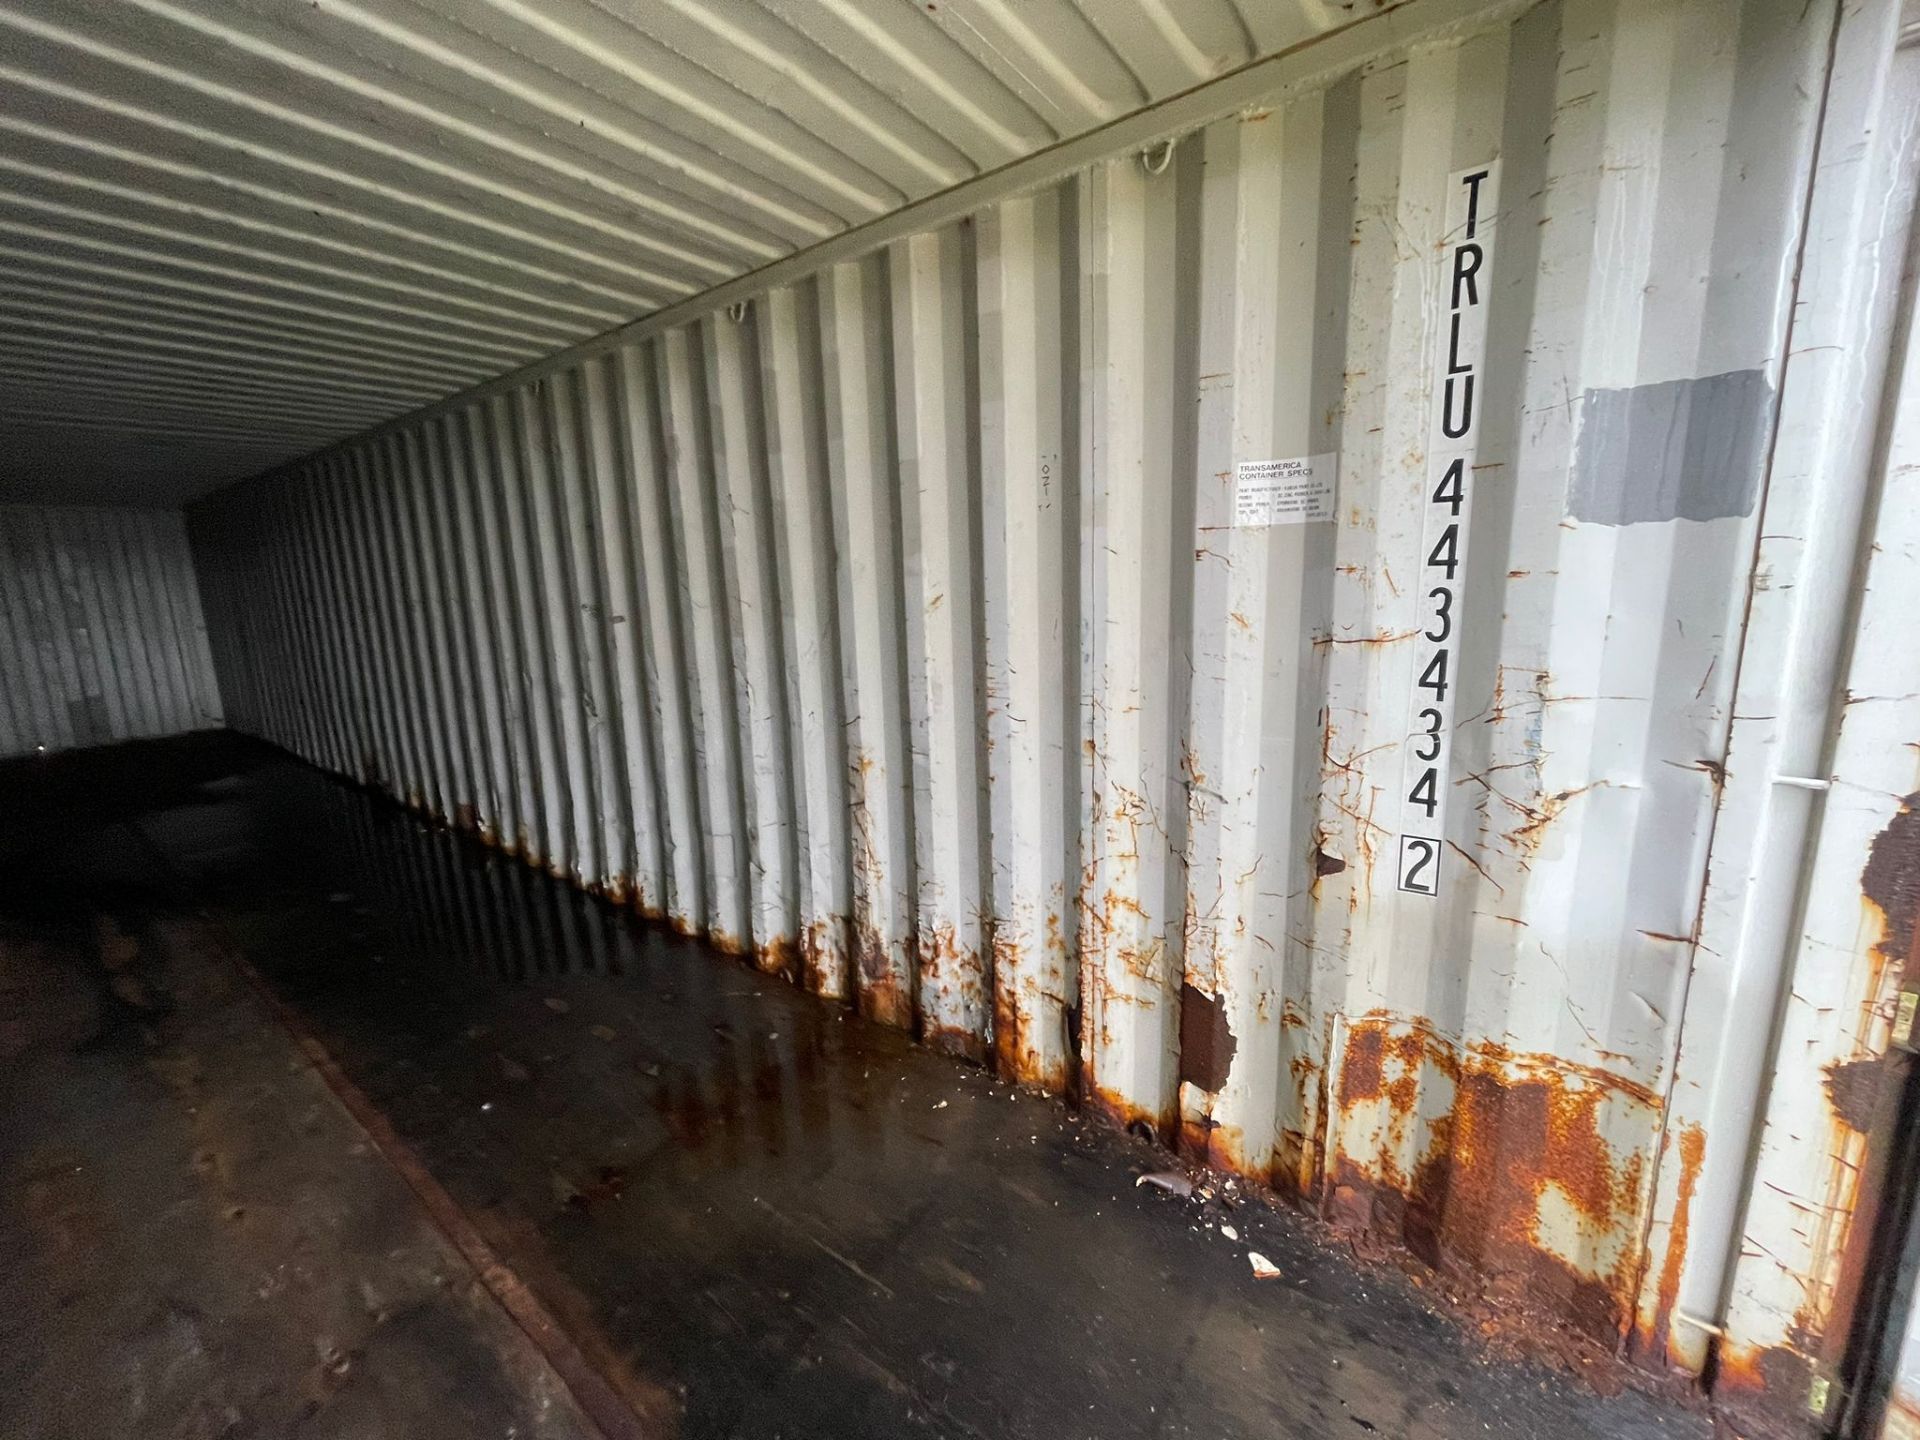 Shipping Container - ref TRLU4434342 - NO RESERVE (40’ GP - Standard) - Image 3 of 4